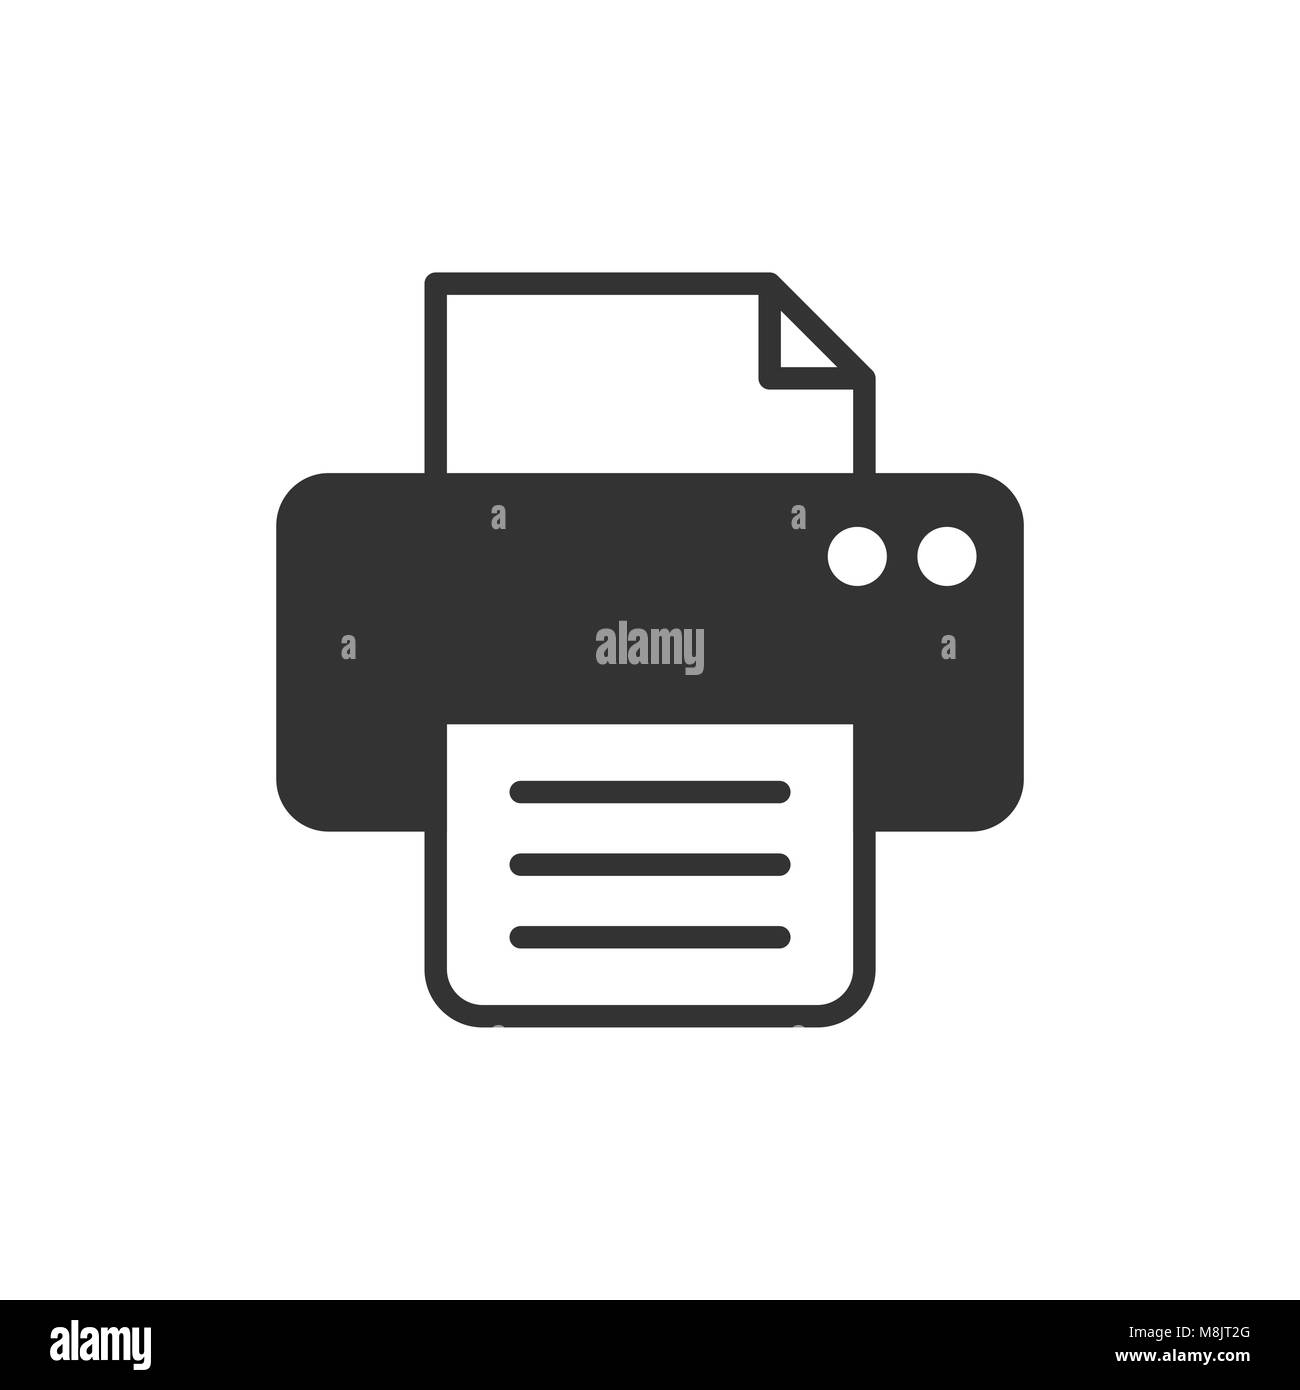 Printer icon. Vector illustration. Business concept document printing pictogram. Stock Vector